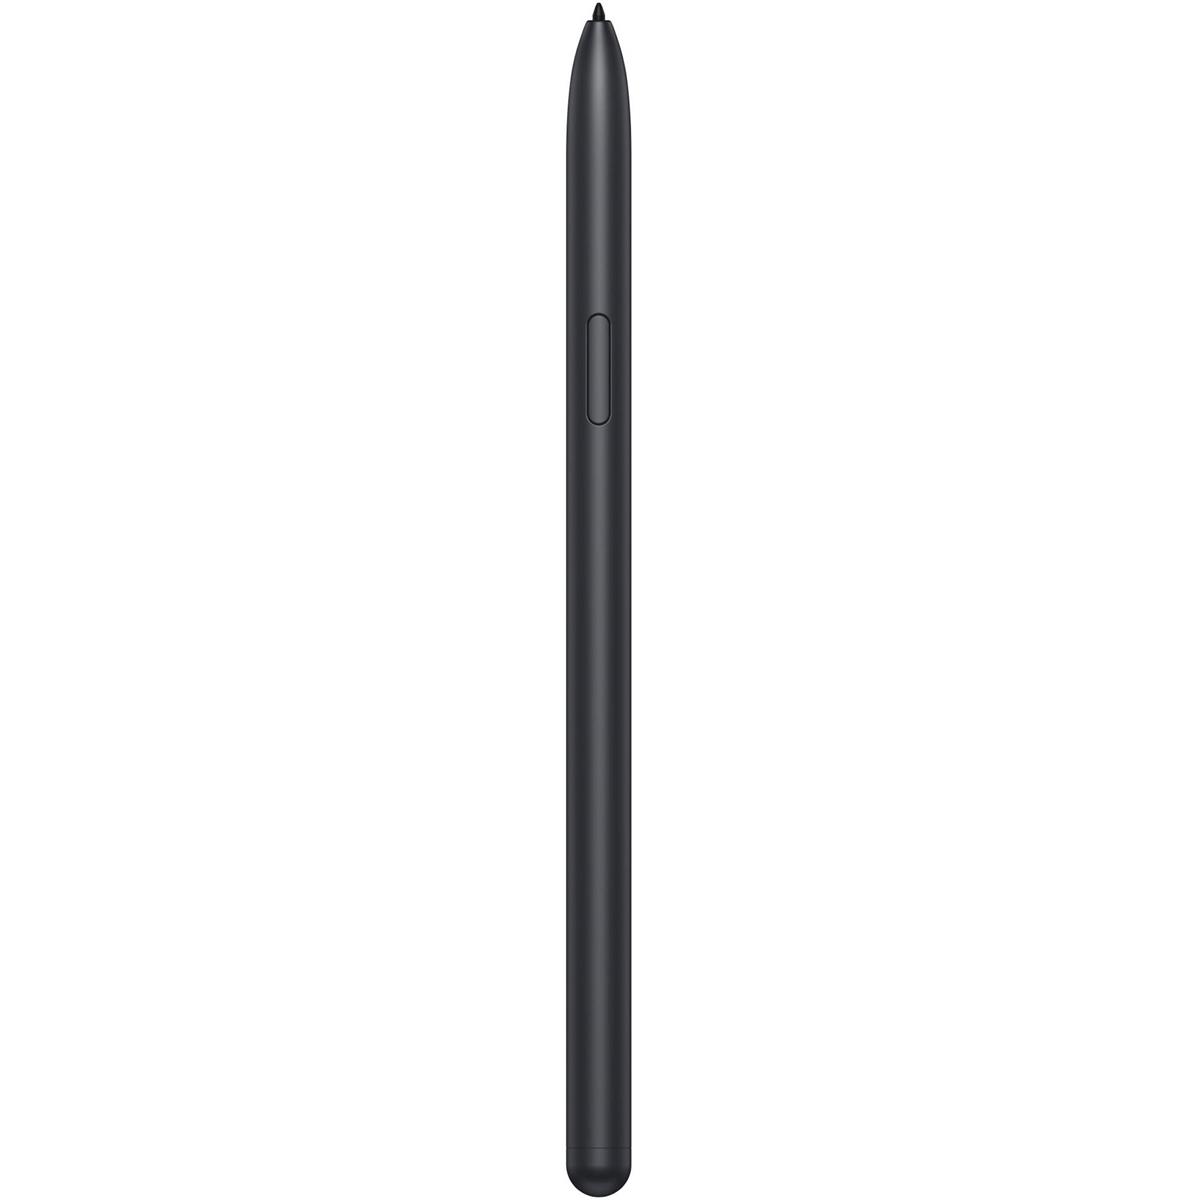 Image of Samsung S Pen for Galaxy Tab S7 FE